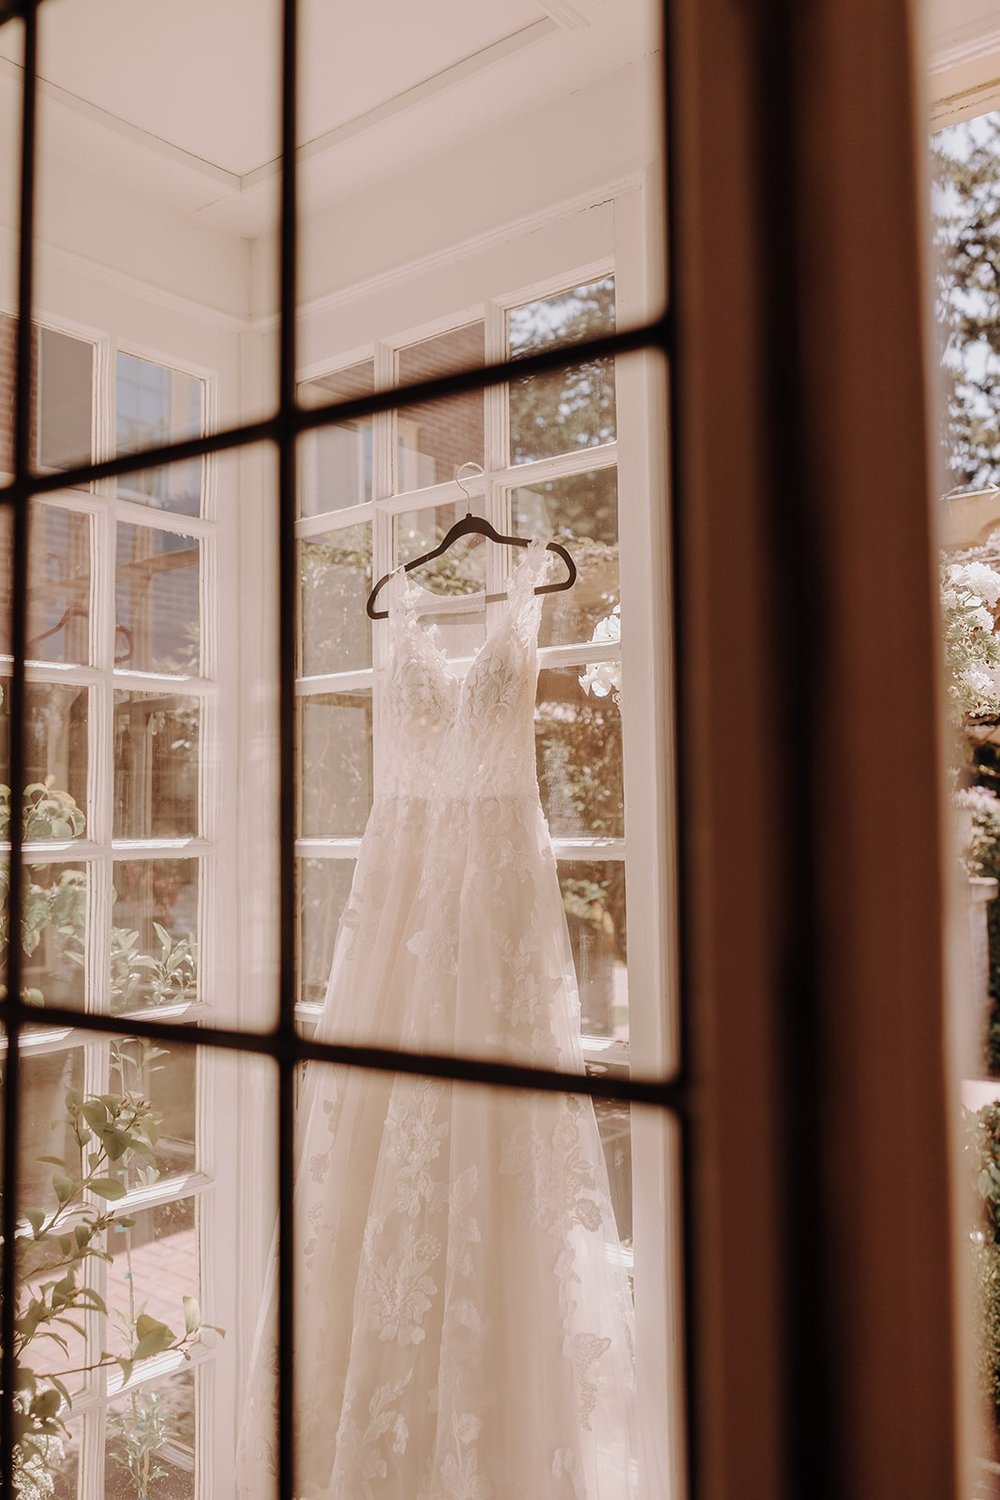 White wedding dress hanging from the window at Lairmont wedding venue in Washington